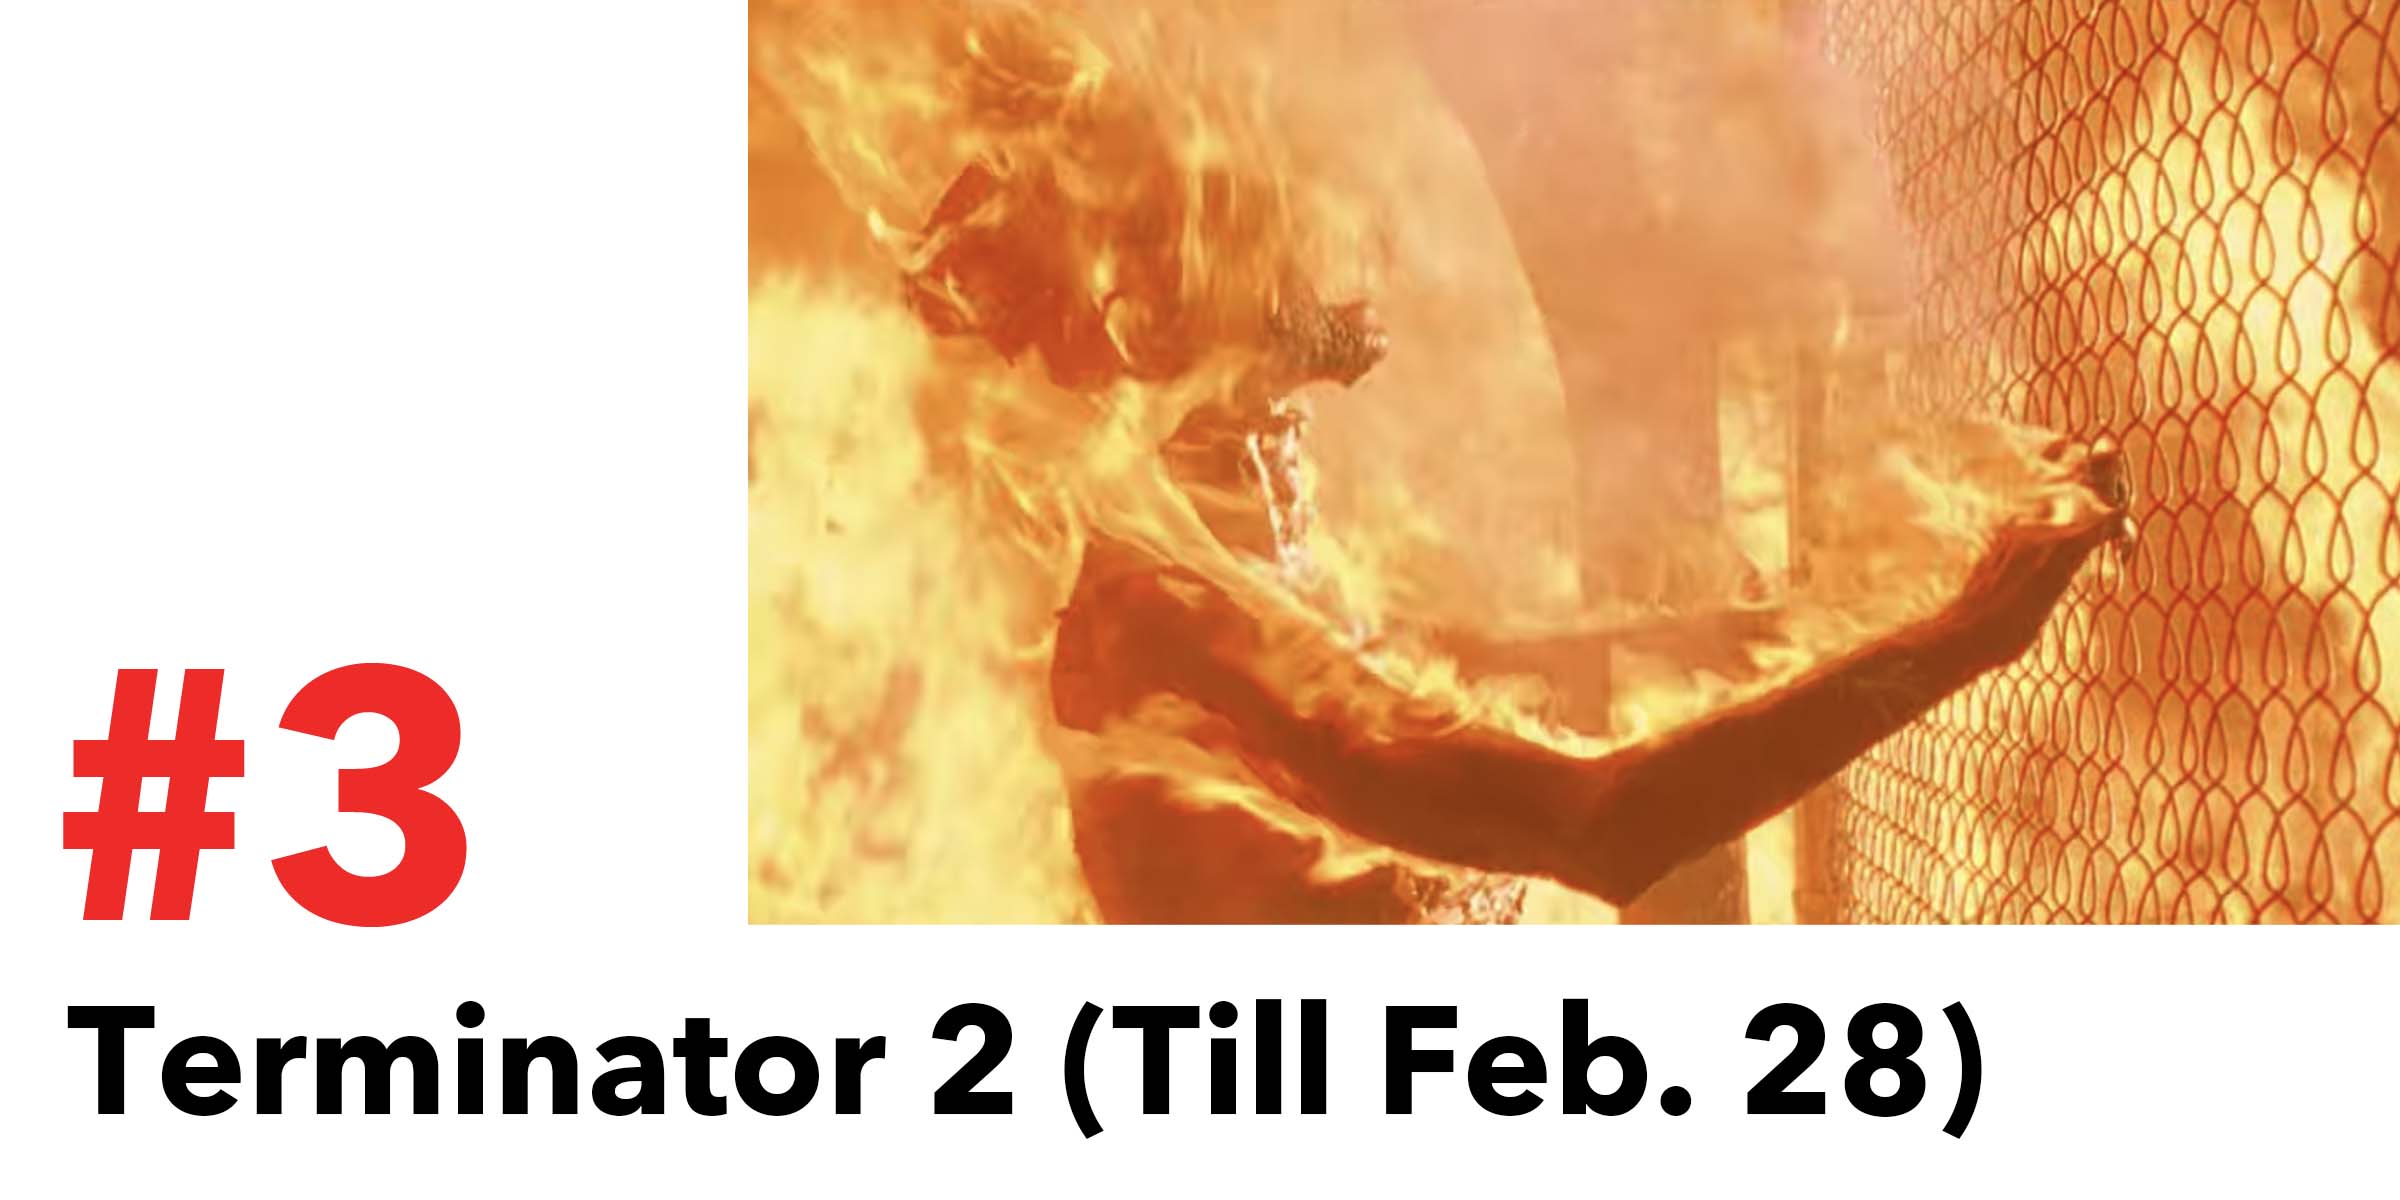 sarah connor is burned alive by nuclear bomb in terminator 2